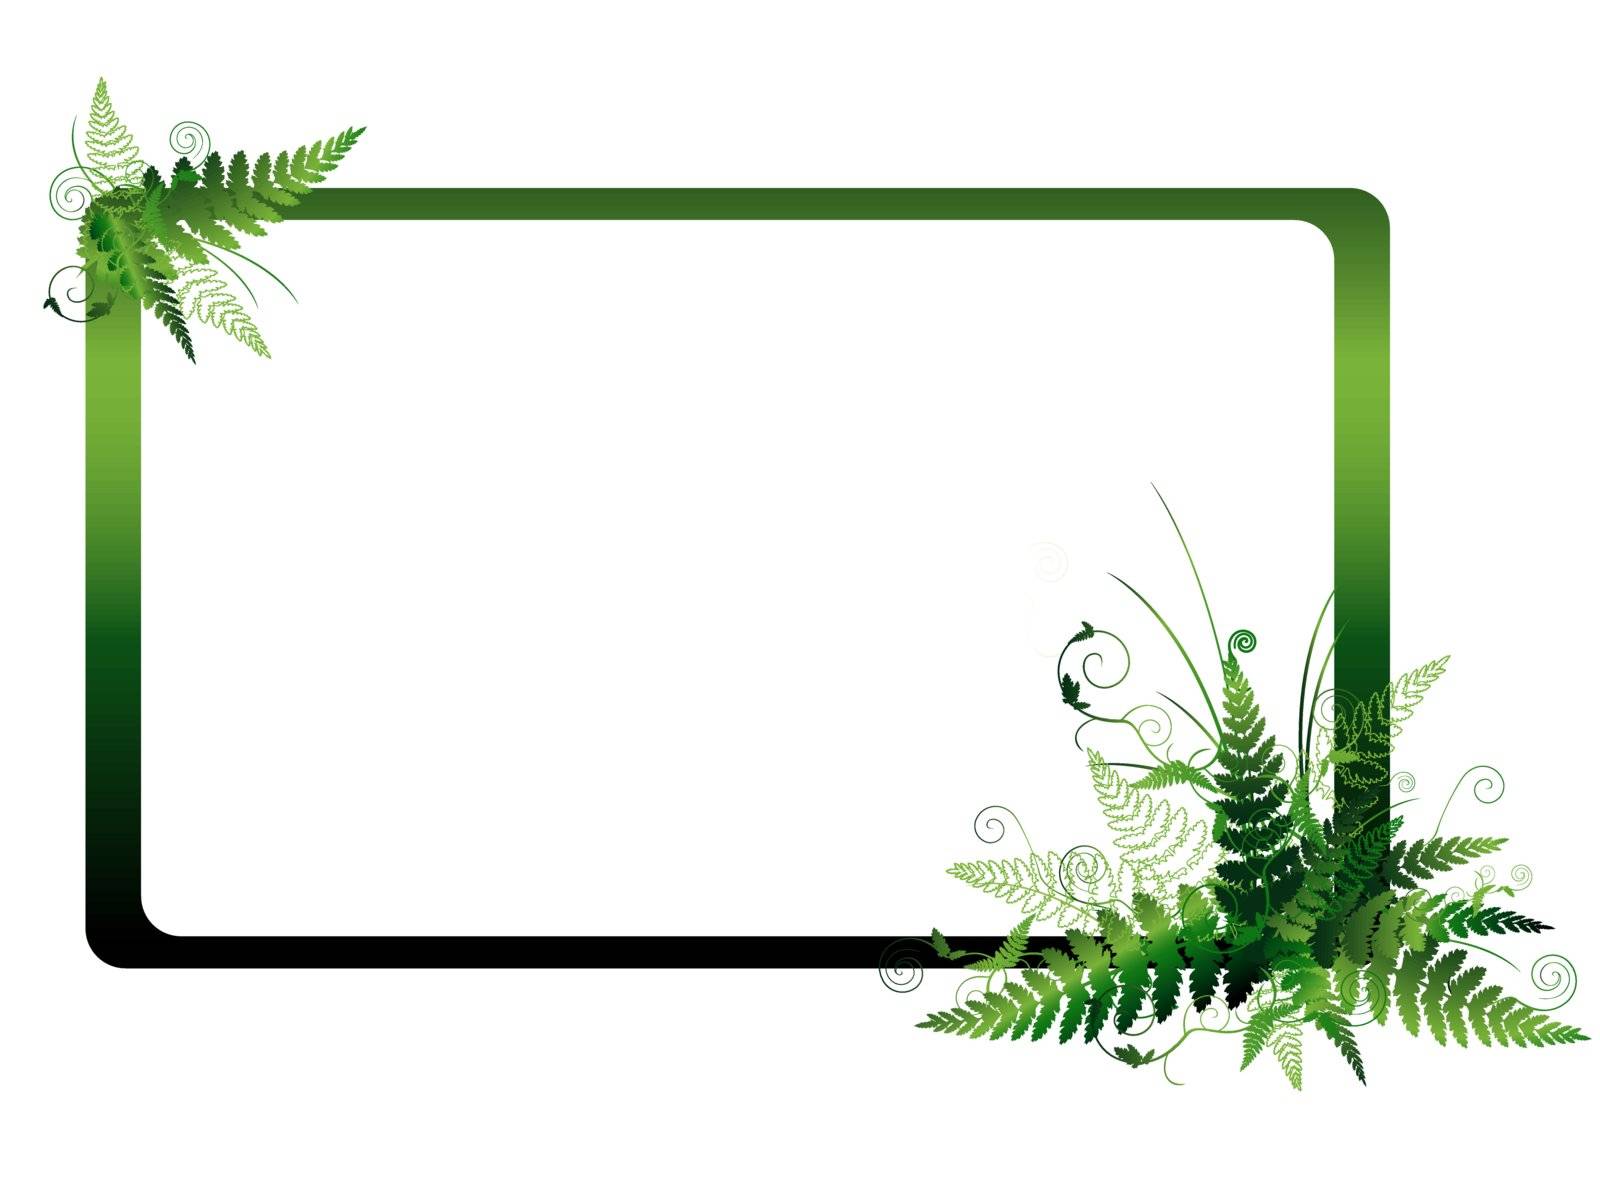 Illustration of the fern frame with copyspace for your text 